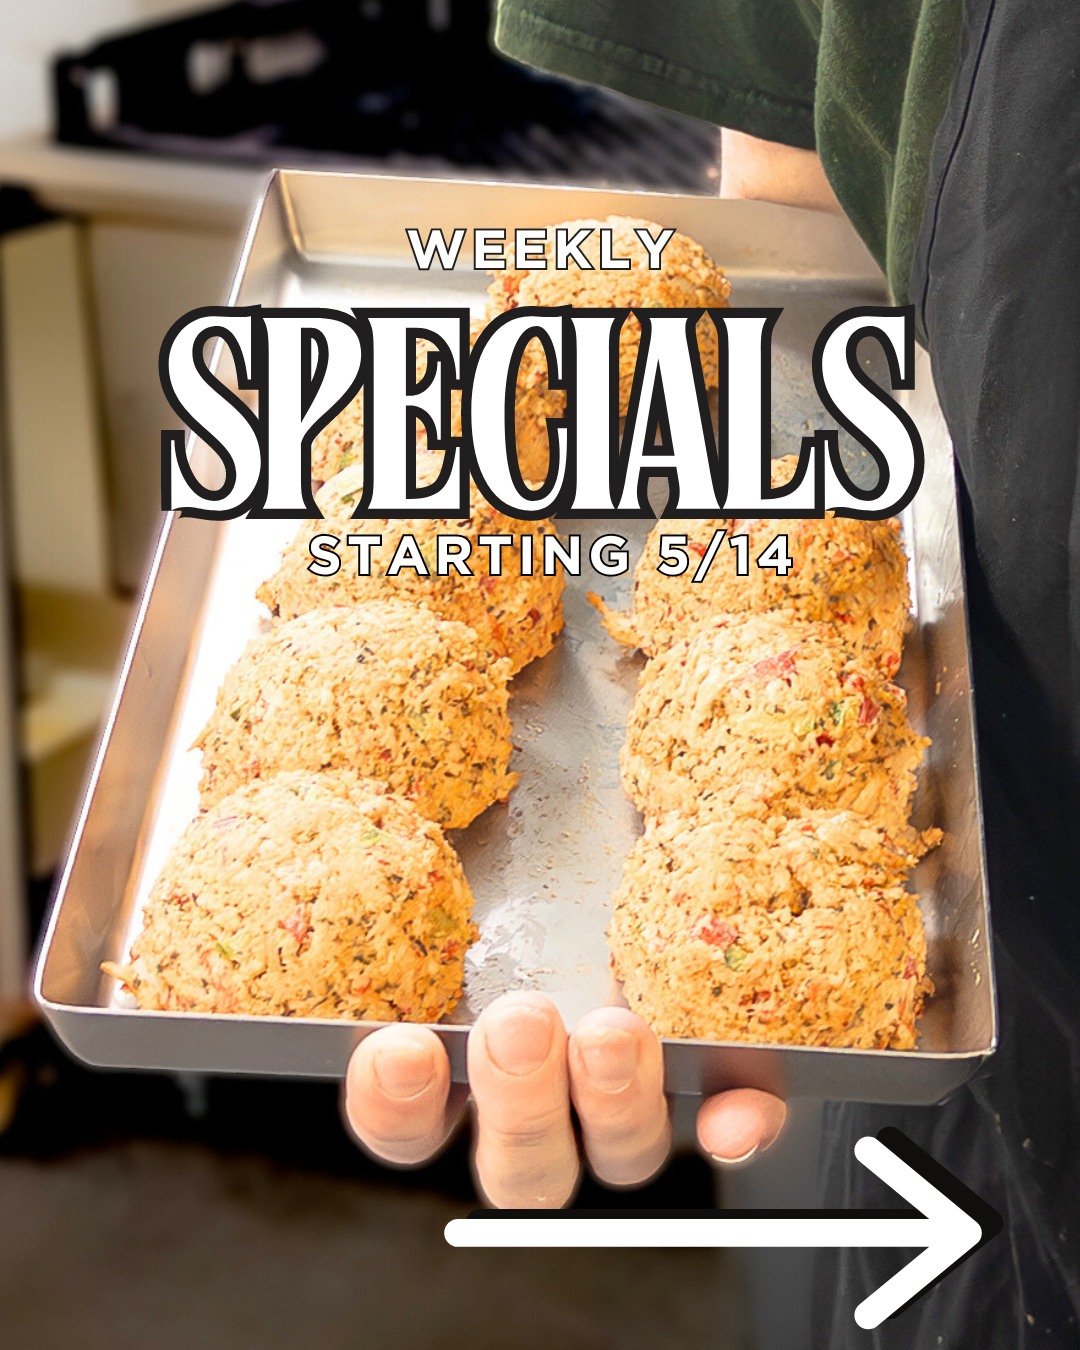 - STEVE'S WEEKLY SPECIALS - STARTING MAY 14TH

MEAT DEPARTMENT:
Split Baby Back Ribs $3.99lb
Chicken Tenders Family Pack $3.29lb
Tri-Tips $7.99lb
Crab Cakes  Buy one get 1 free

#SeeYouAtSteves #groceryspecials #LocalGrocer #sale #southerngroceries